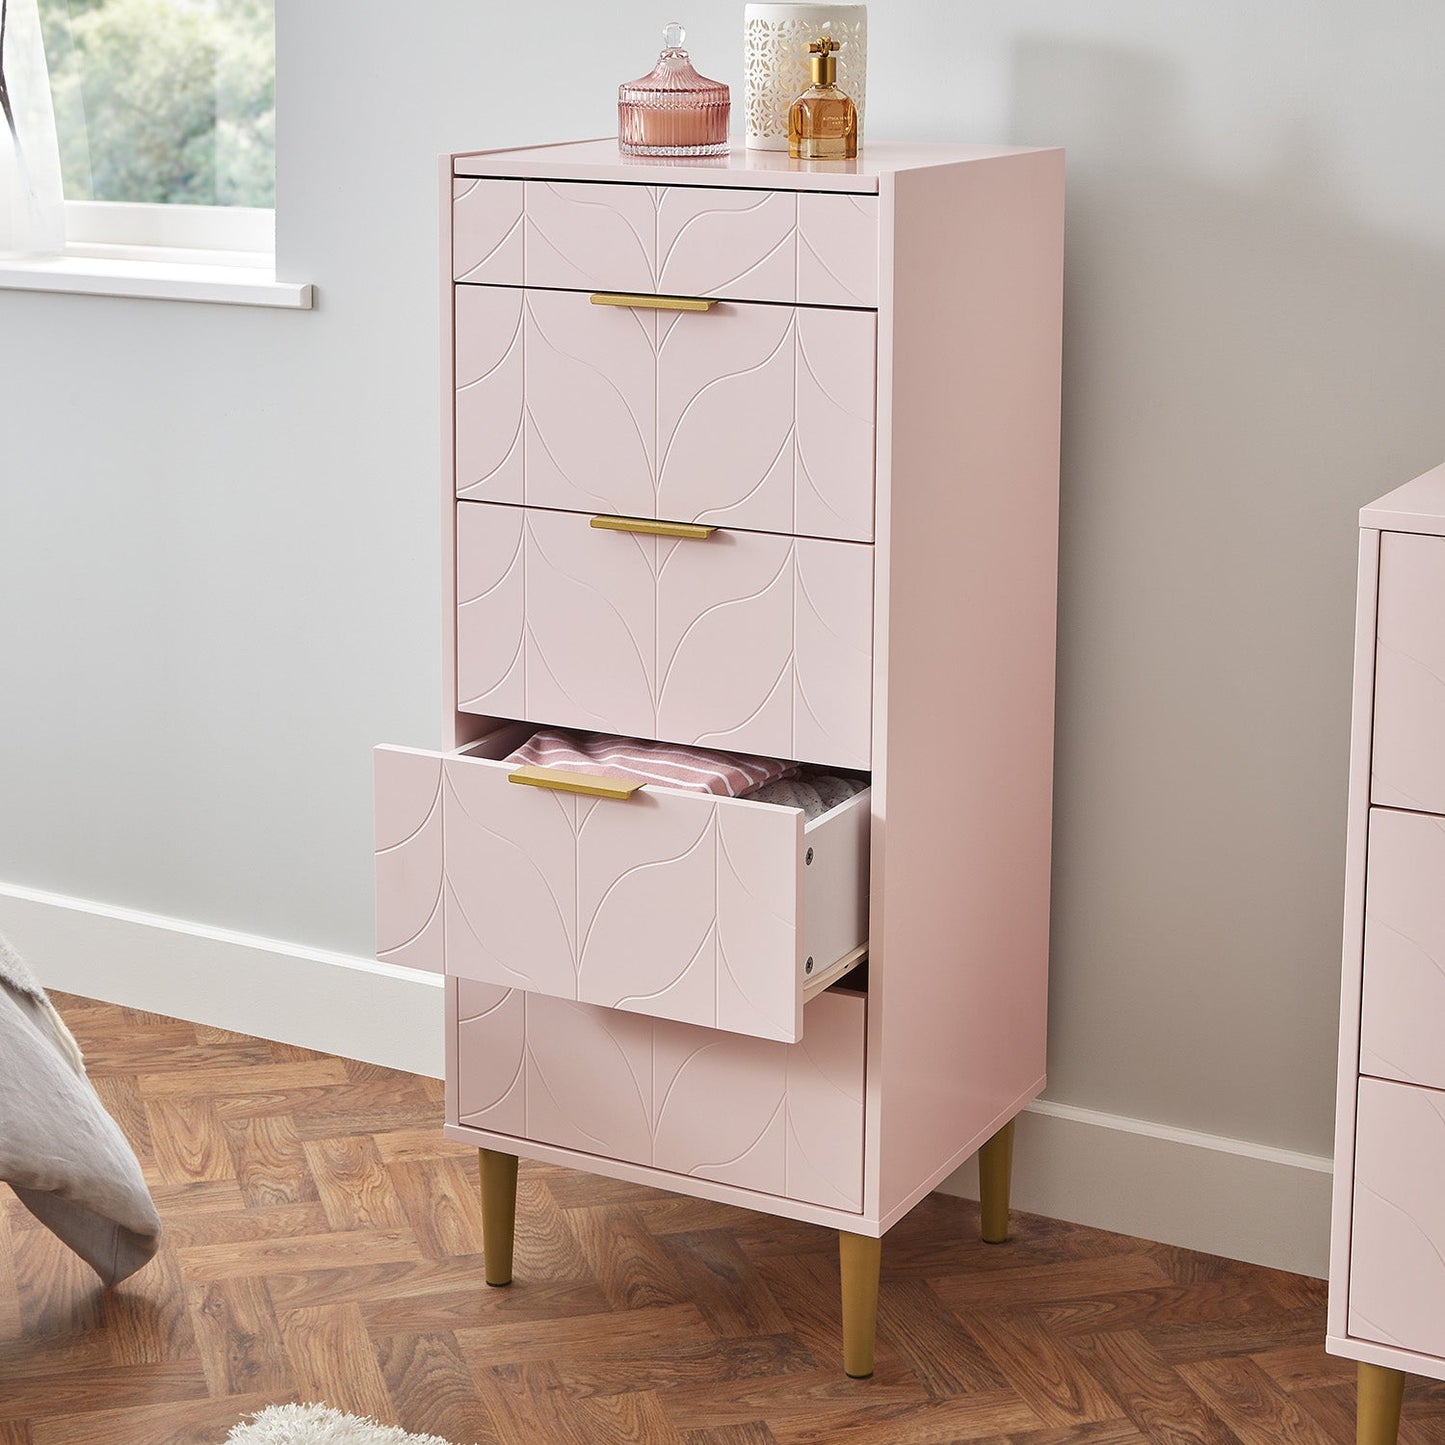 Gloria wardrobe and drawers set -3 drawer chest of drawers - pink - Laura James